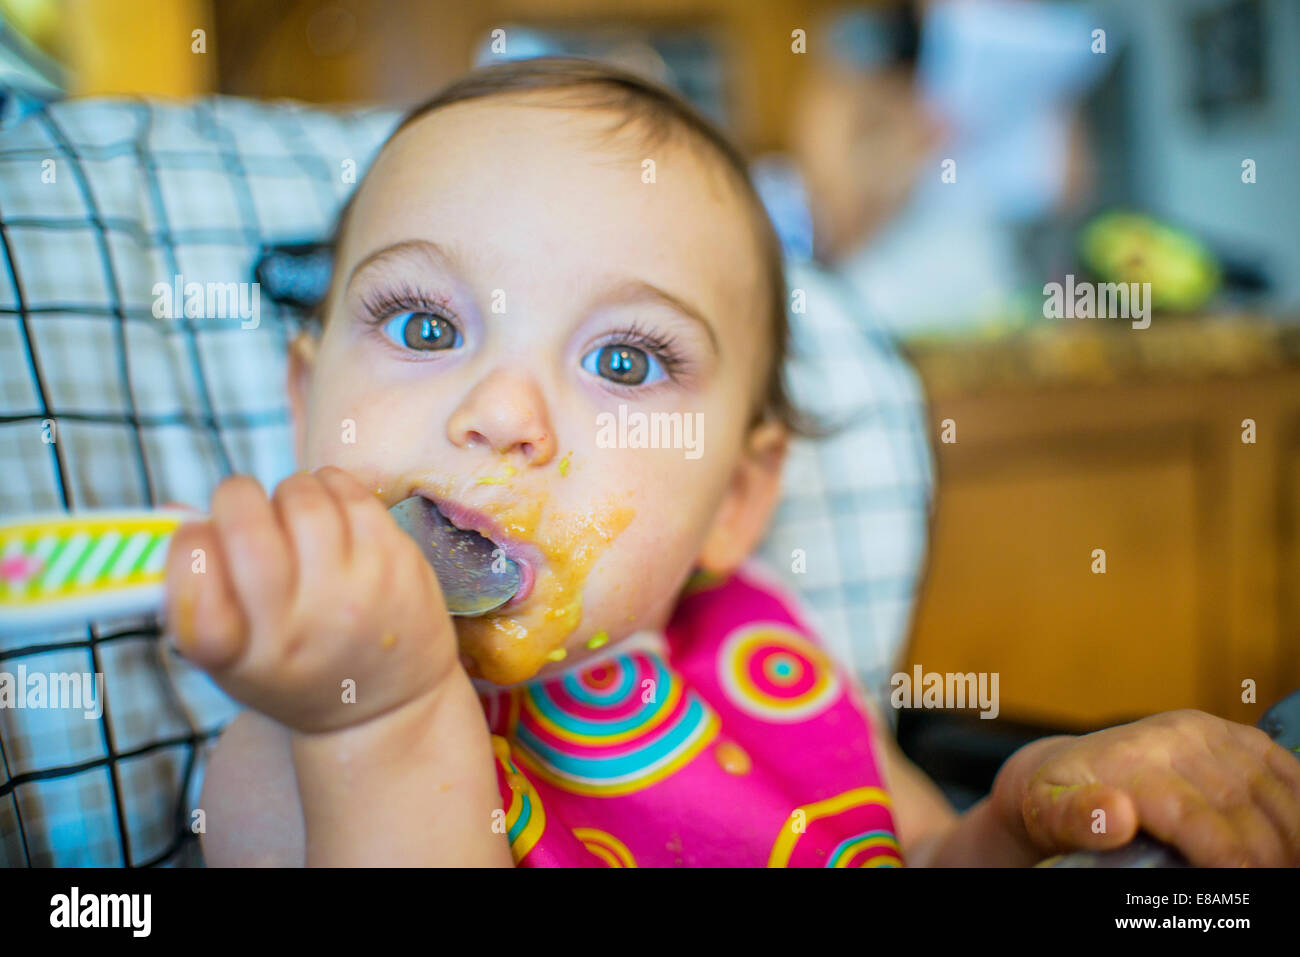 Portrait of baby girl eating from spoon Stock Photo